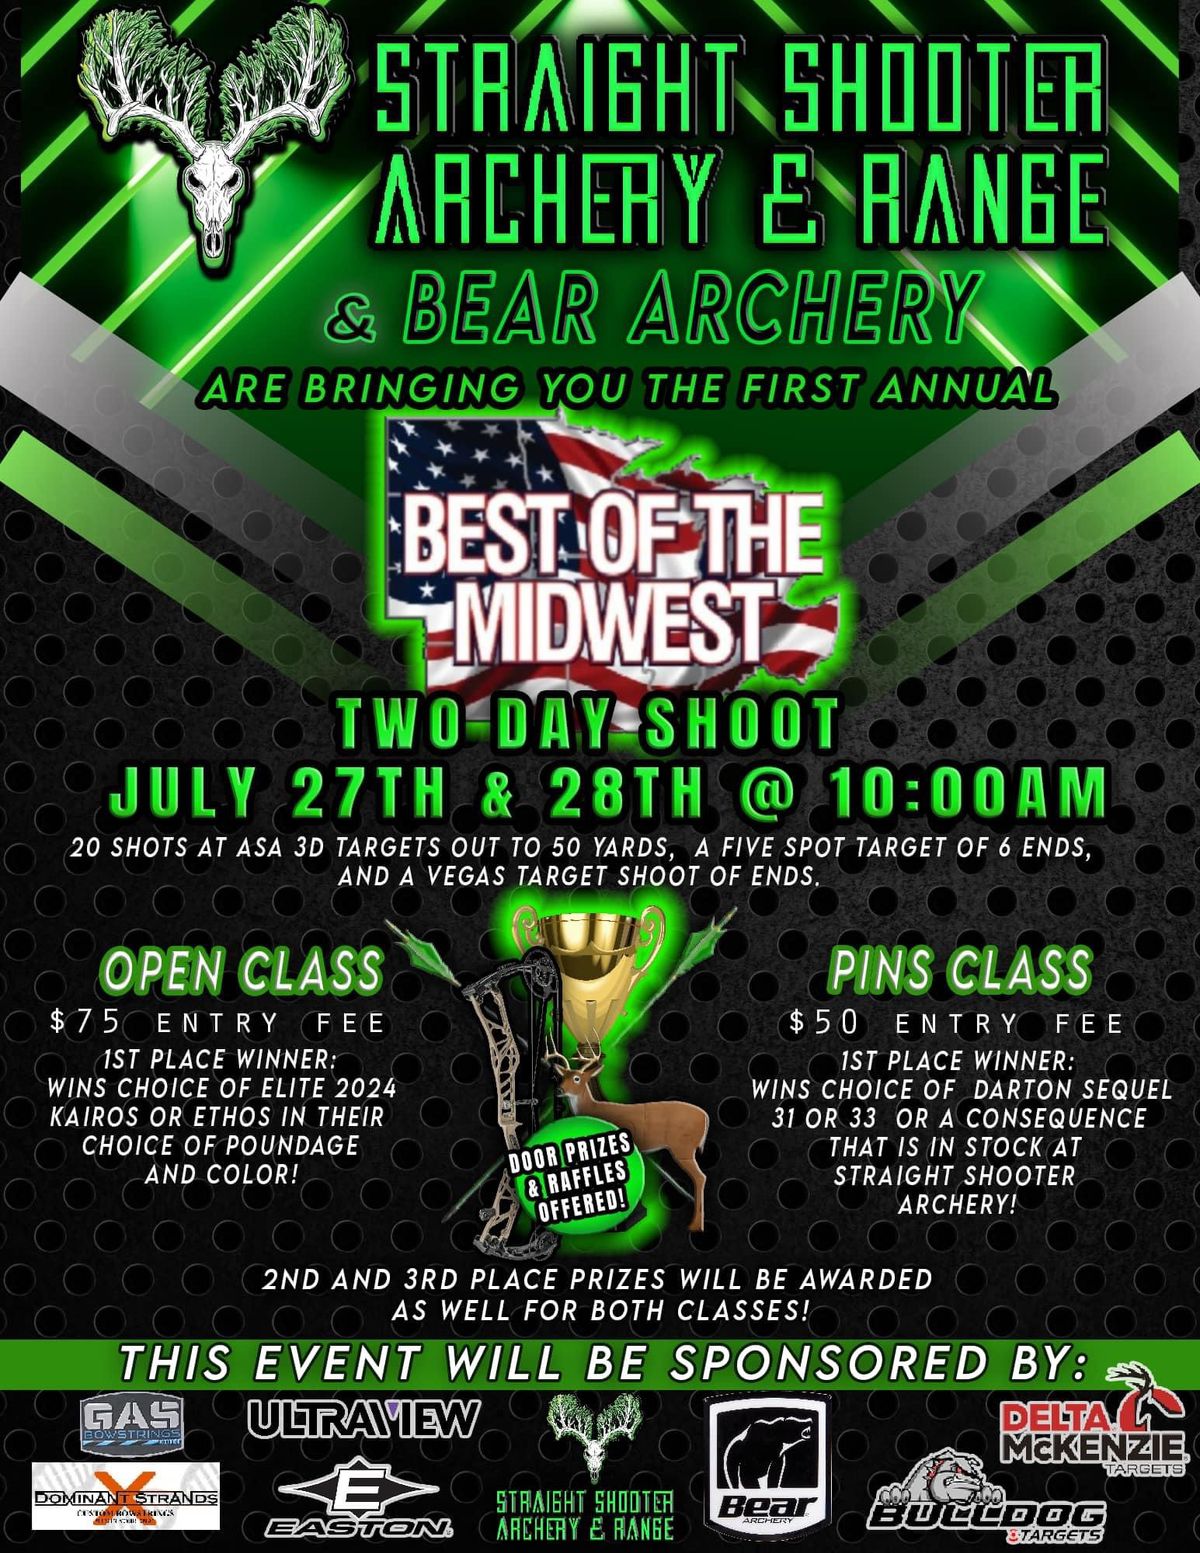 Inaugural Best of the Midwest 